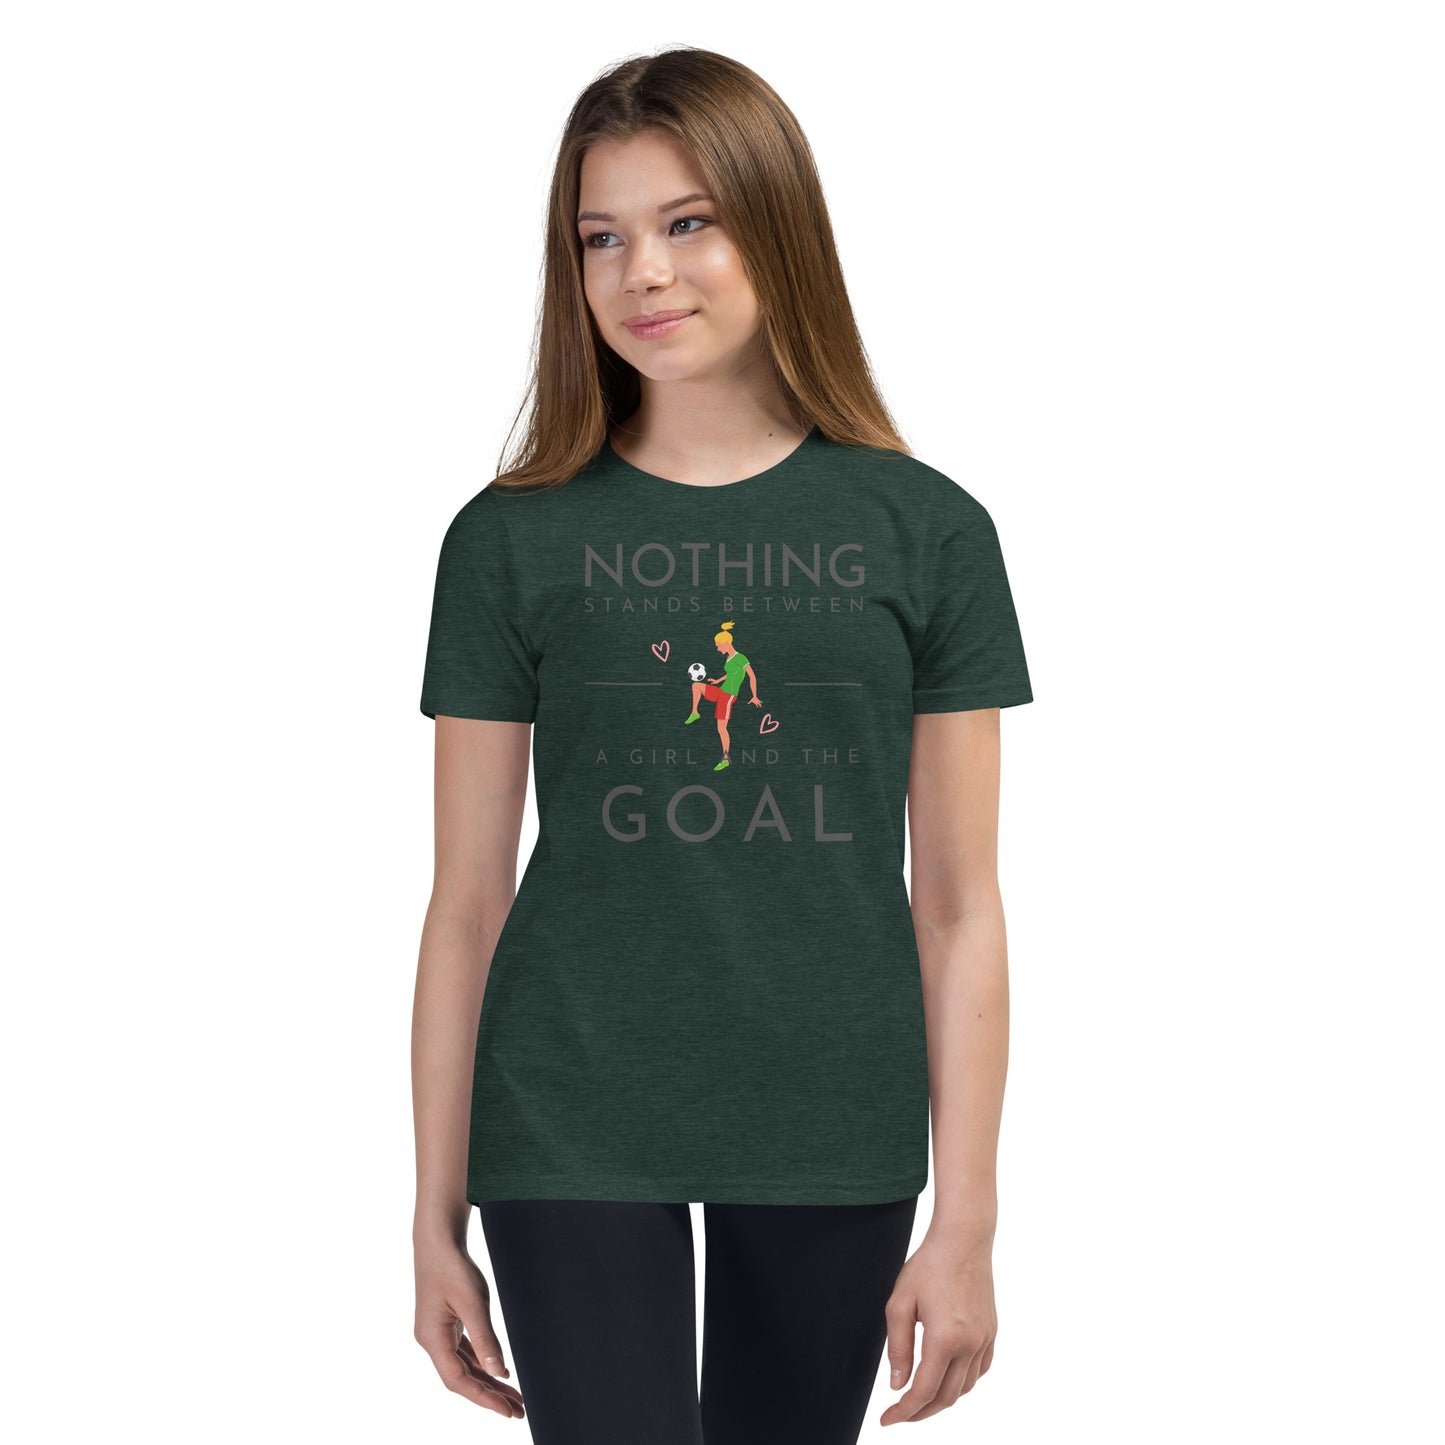 A Girl and A Goal - Youth Short Sleeve T-Shirt